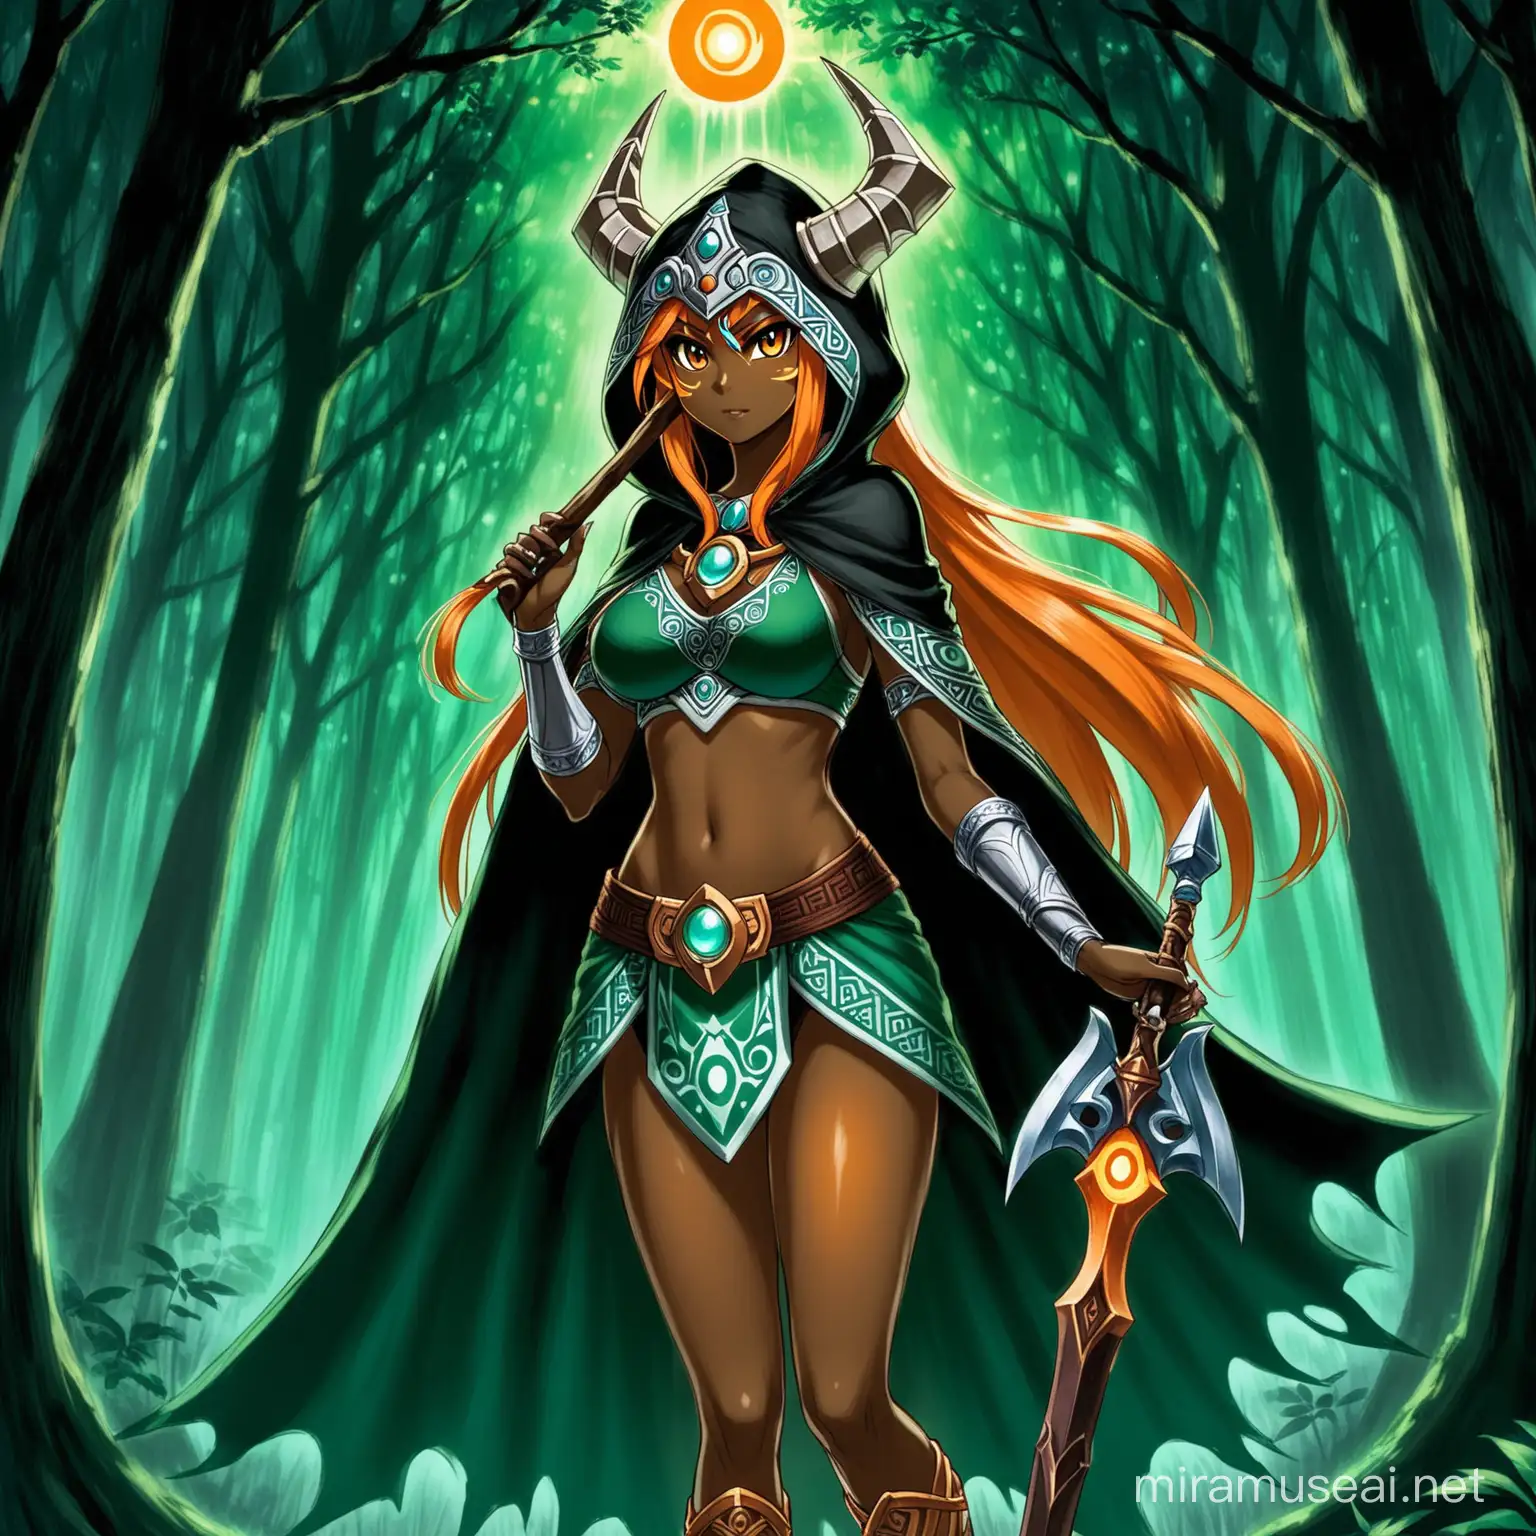 Make a drawing of adult dark skinned human Midna from Zelda Twilight Princess. She has orange long hair and is dressed in a black cloak and a hood. Her large breasts are almost exposed. She holds a halberd on her shoulder and cast a spell with her other hand. There is a haunted forest and shadows in the background.